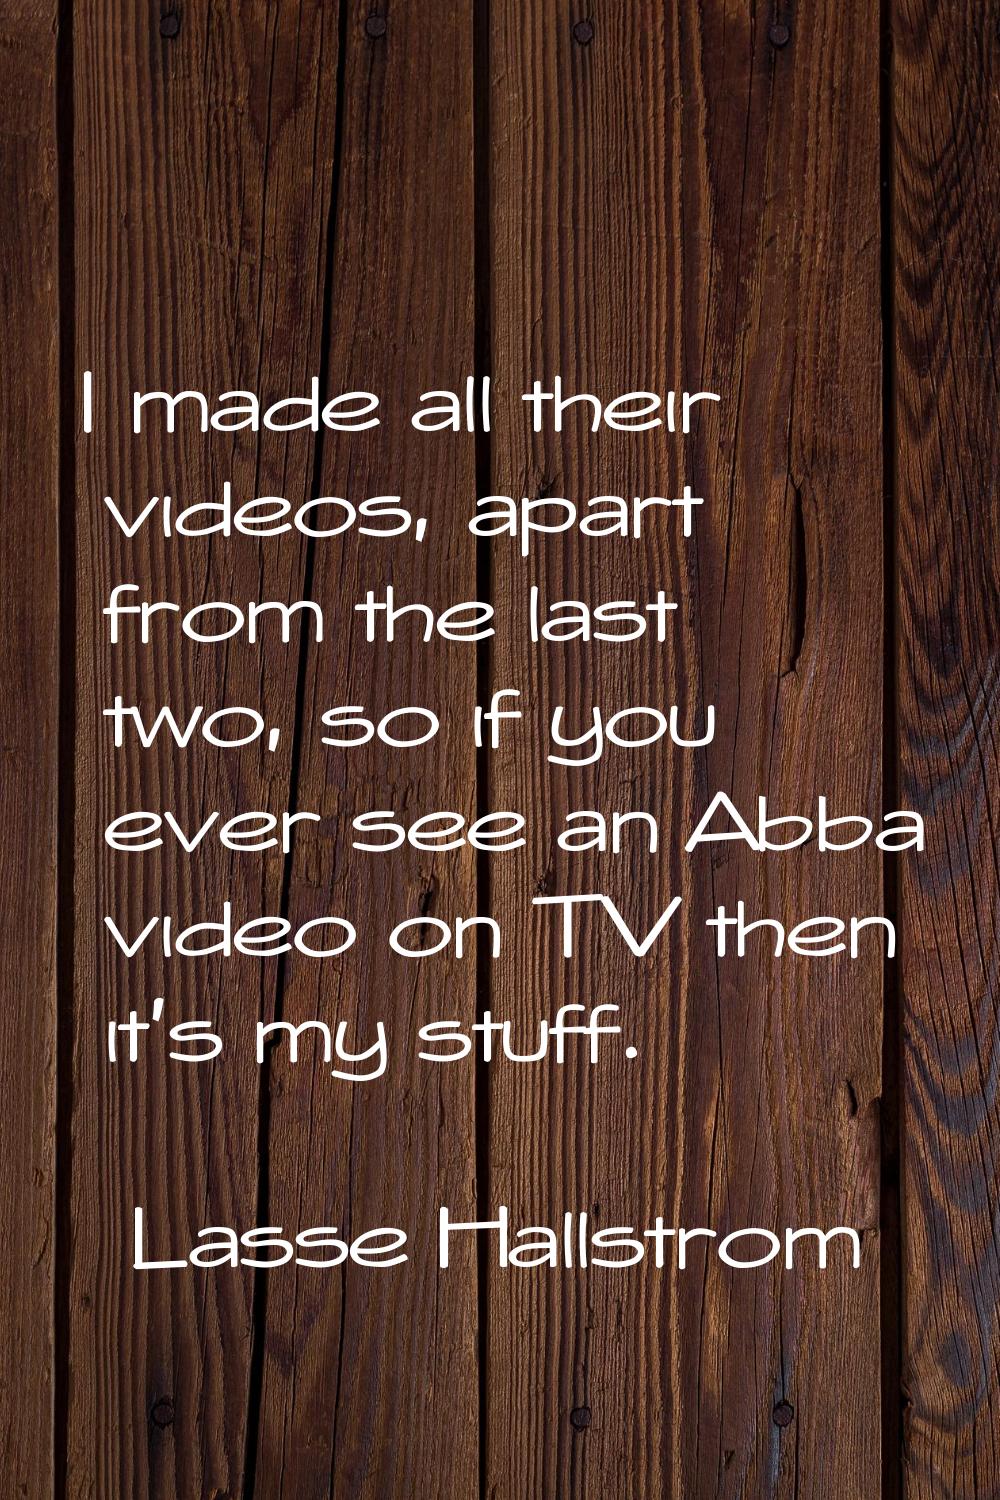 I made all their videos, apart from the last two, so if you ever see an Abba video on TV then it's 